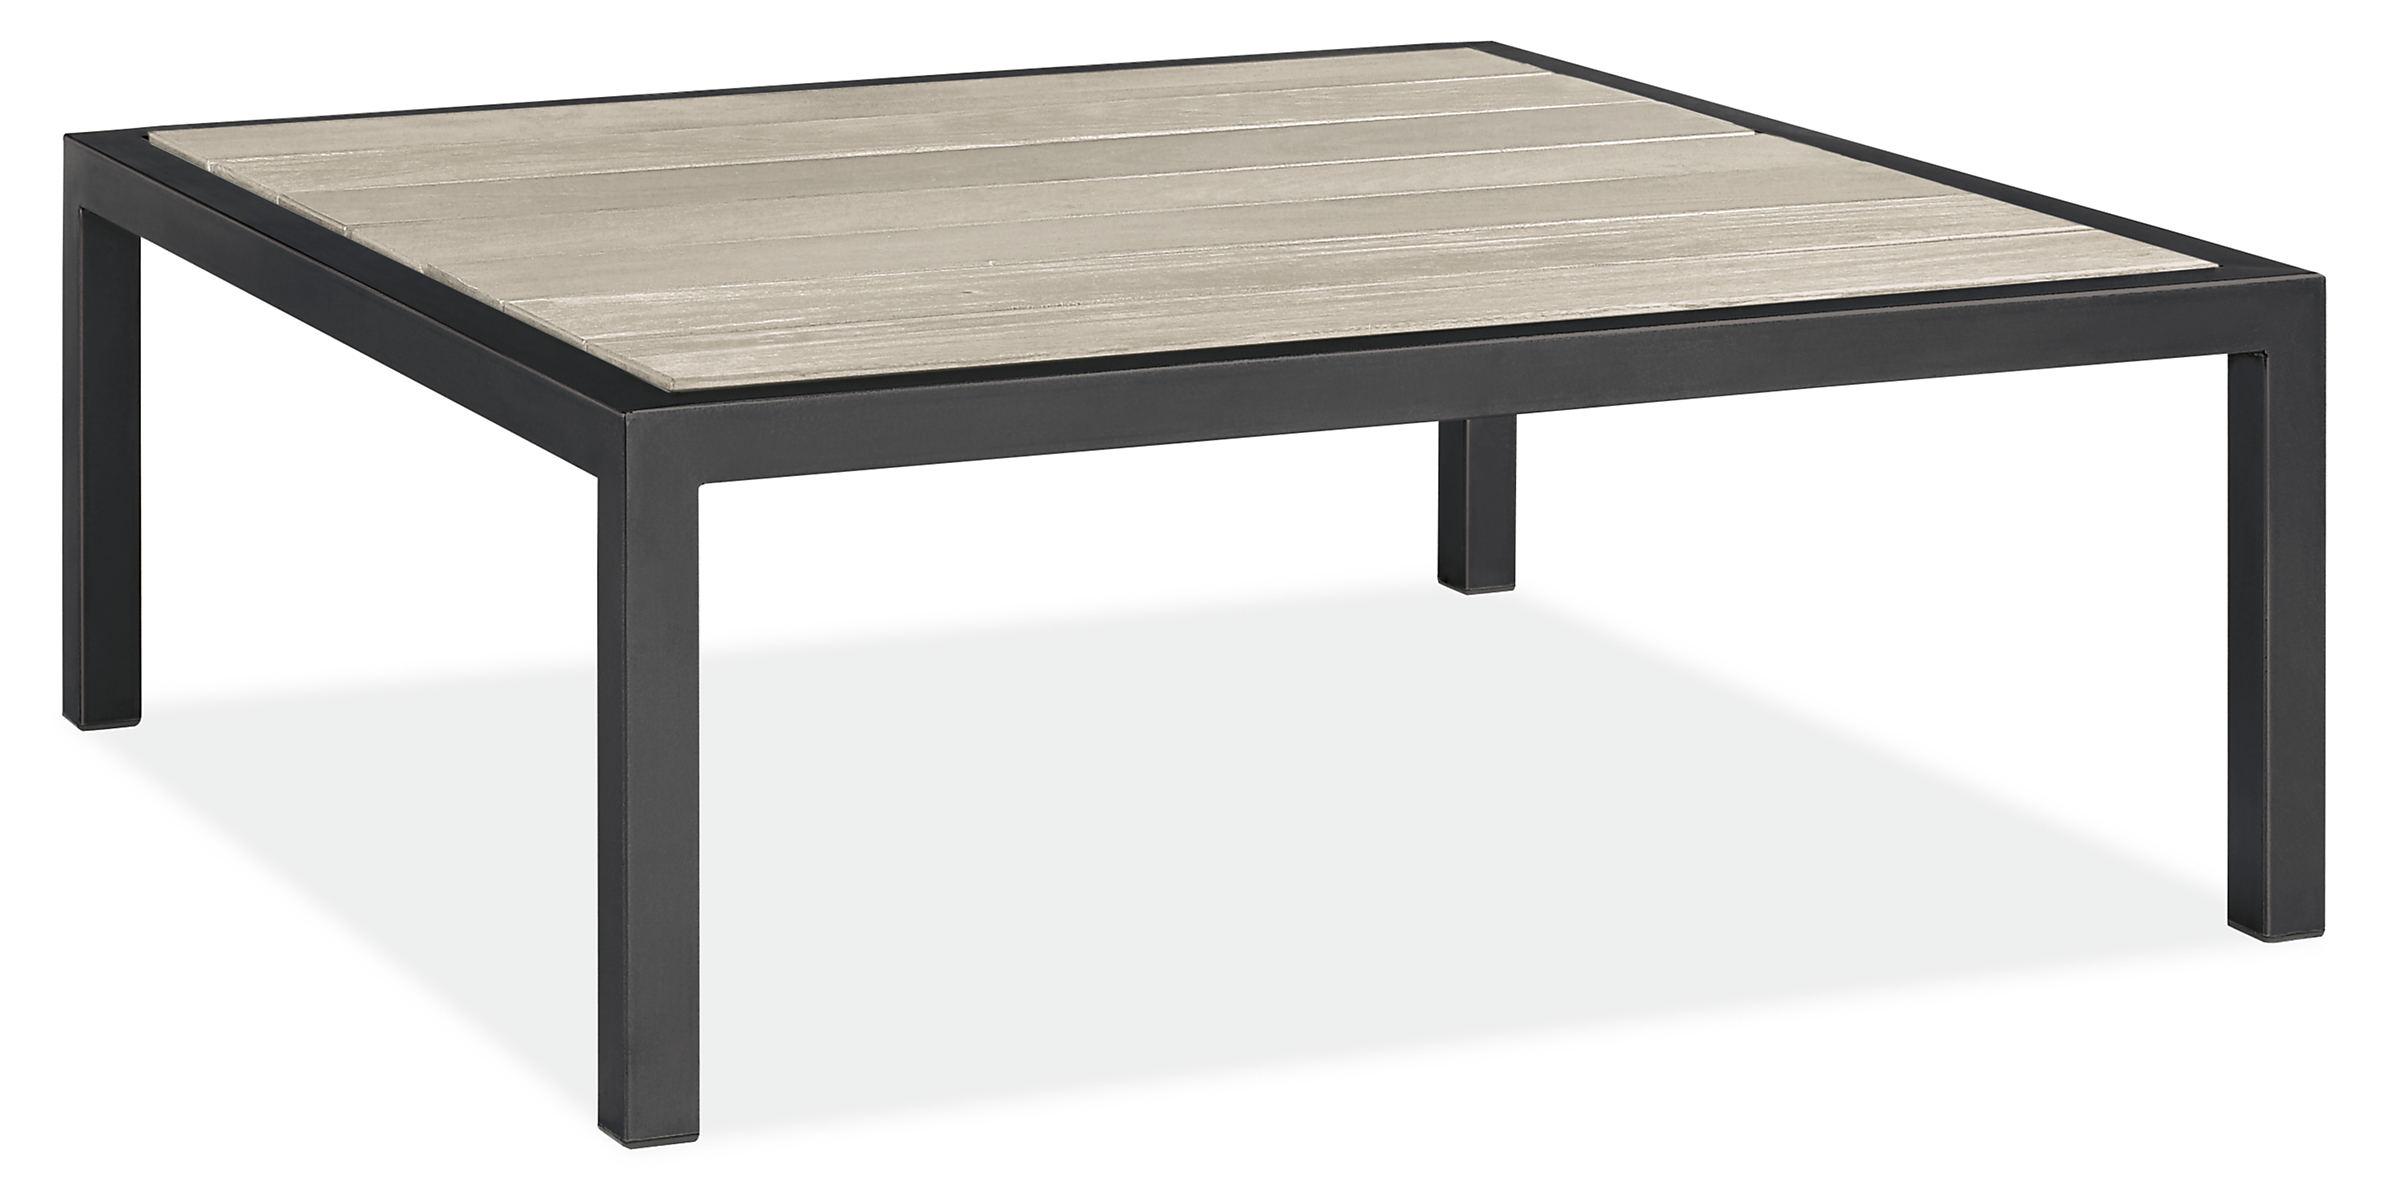 Montego Coffee Table in Urban Wood